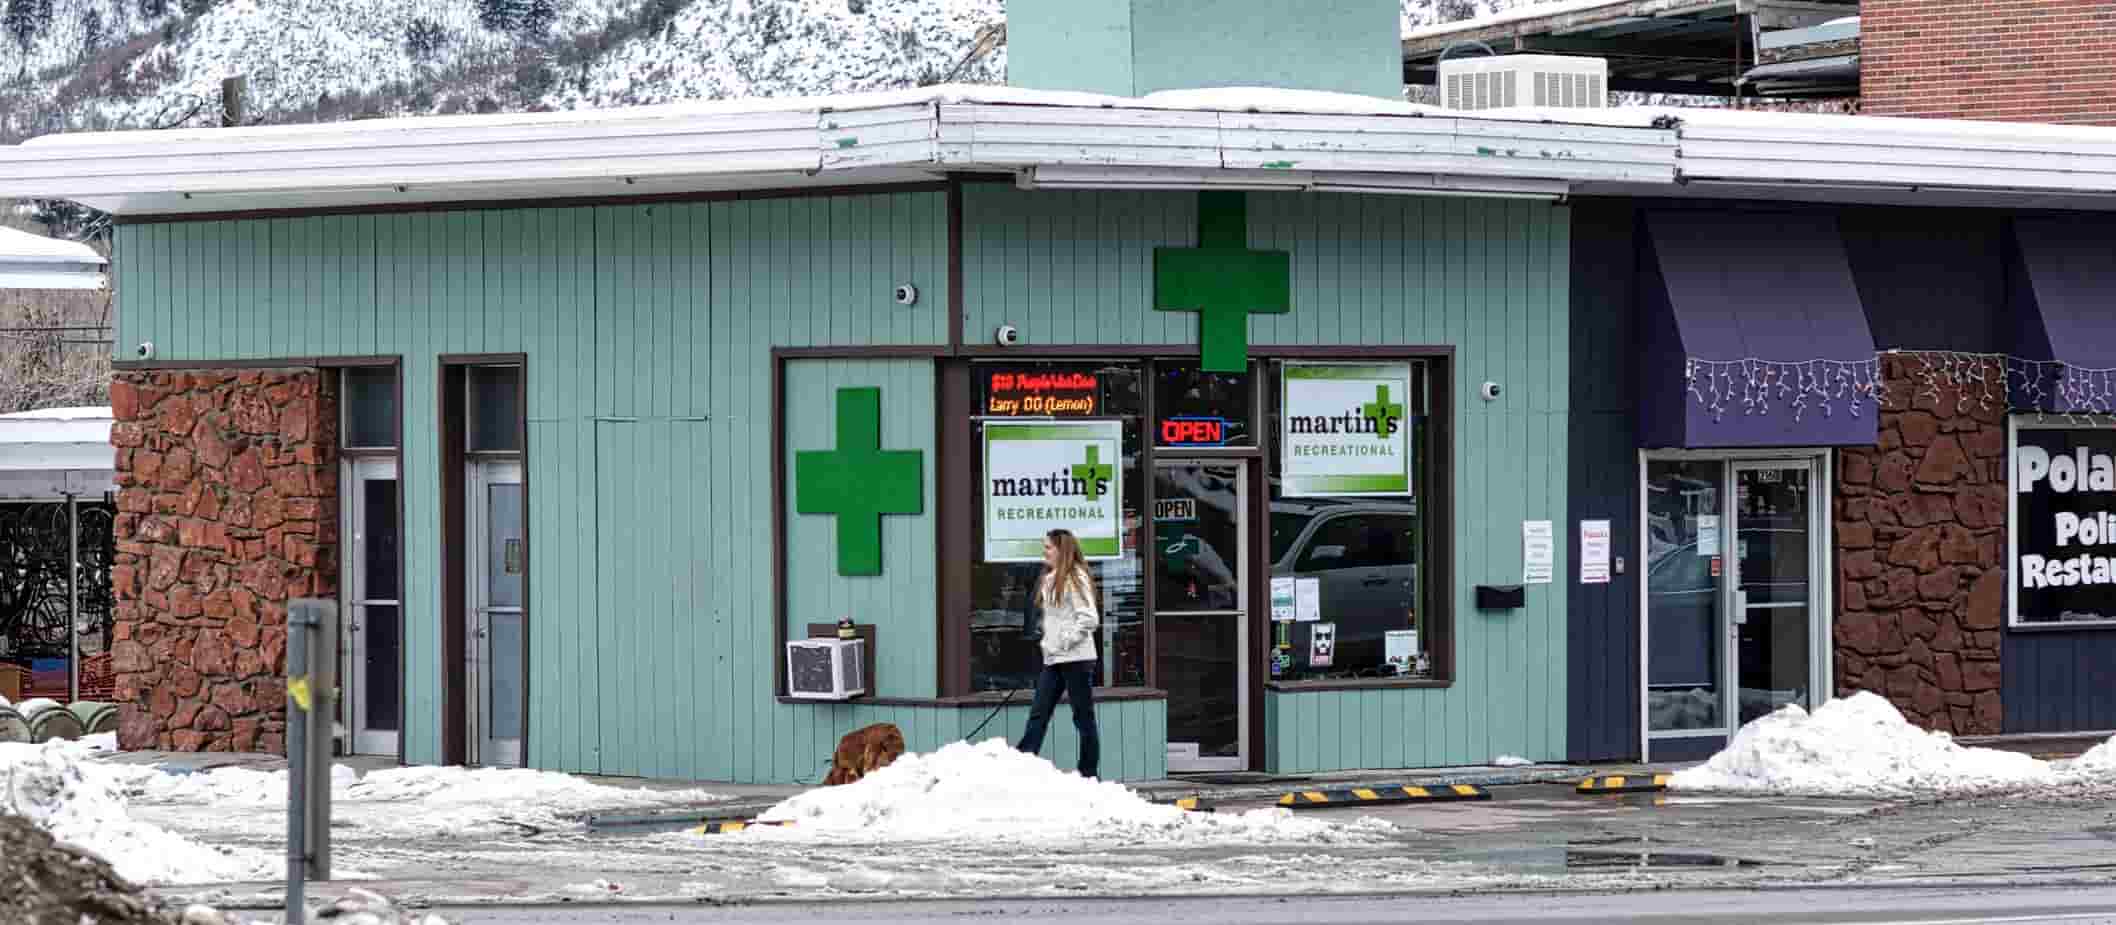 Glenwood Springs, Colorado, USA - January 6, 2016: A woman and her dog stroll past the tell-tale green crosses on a storefront in downtown Glenwood Springs that identifies it as a legal drug shop.